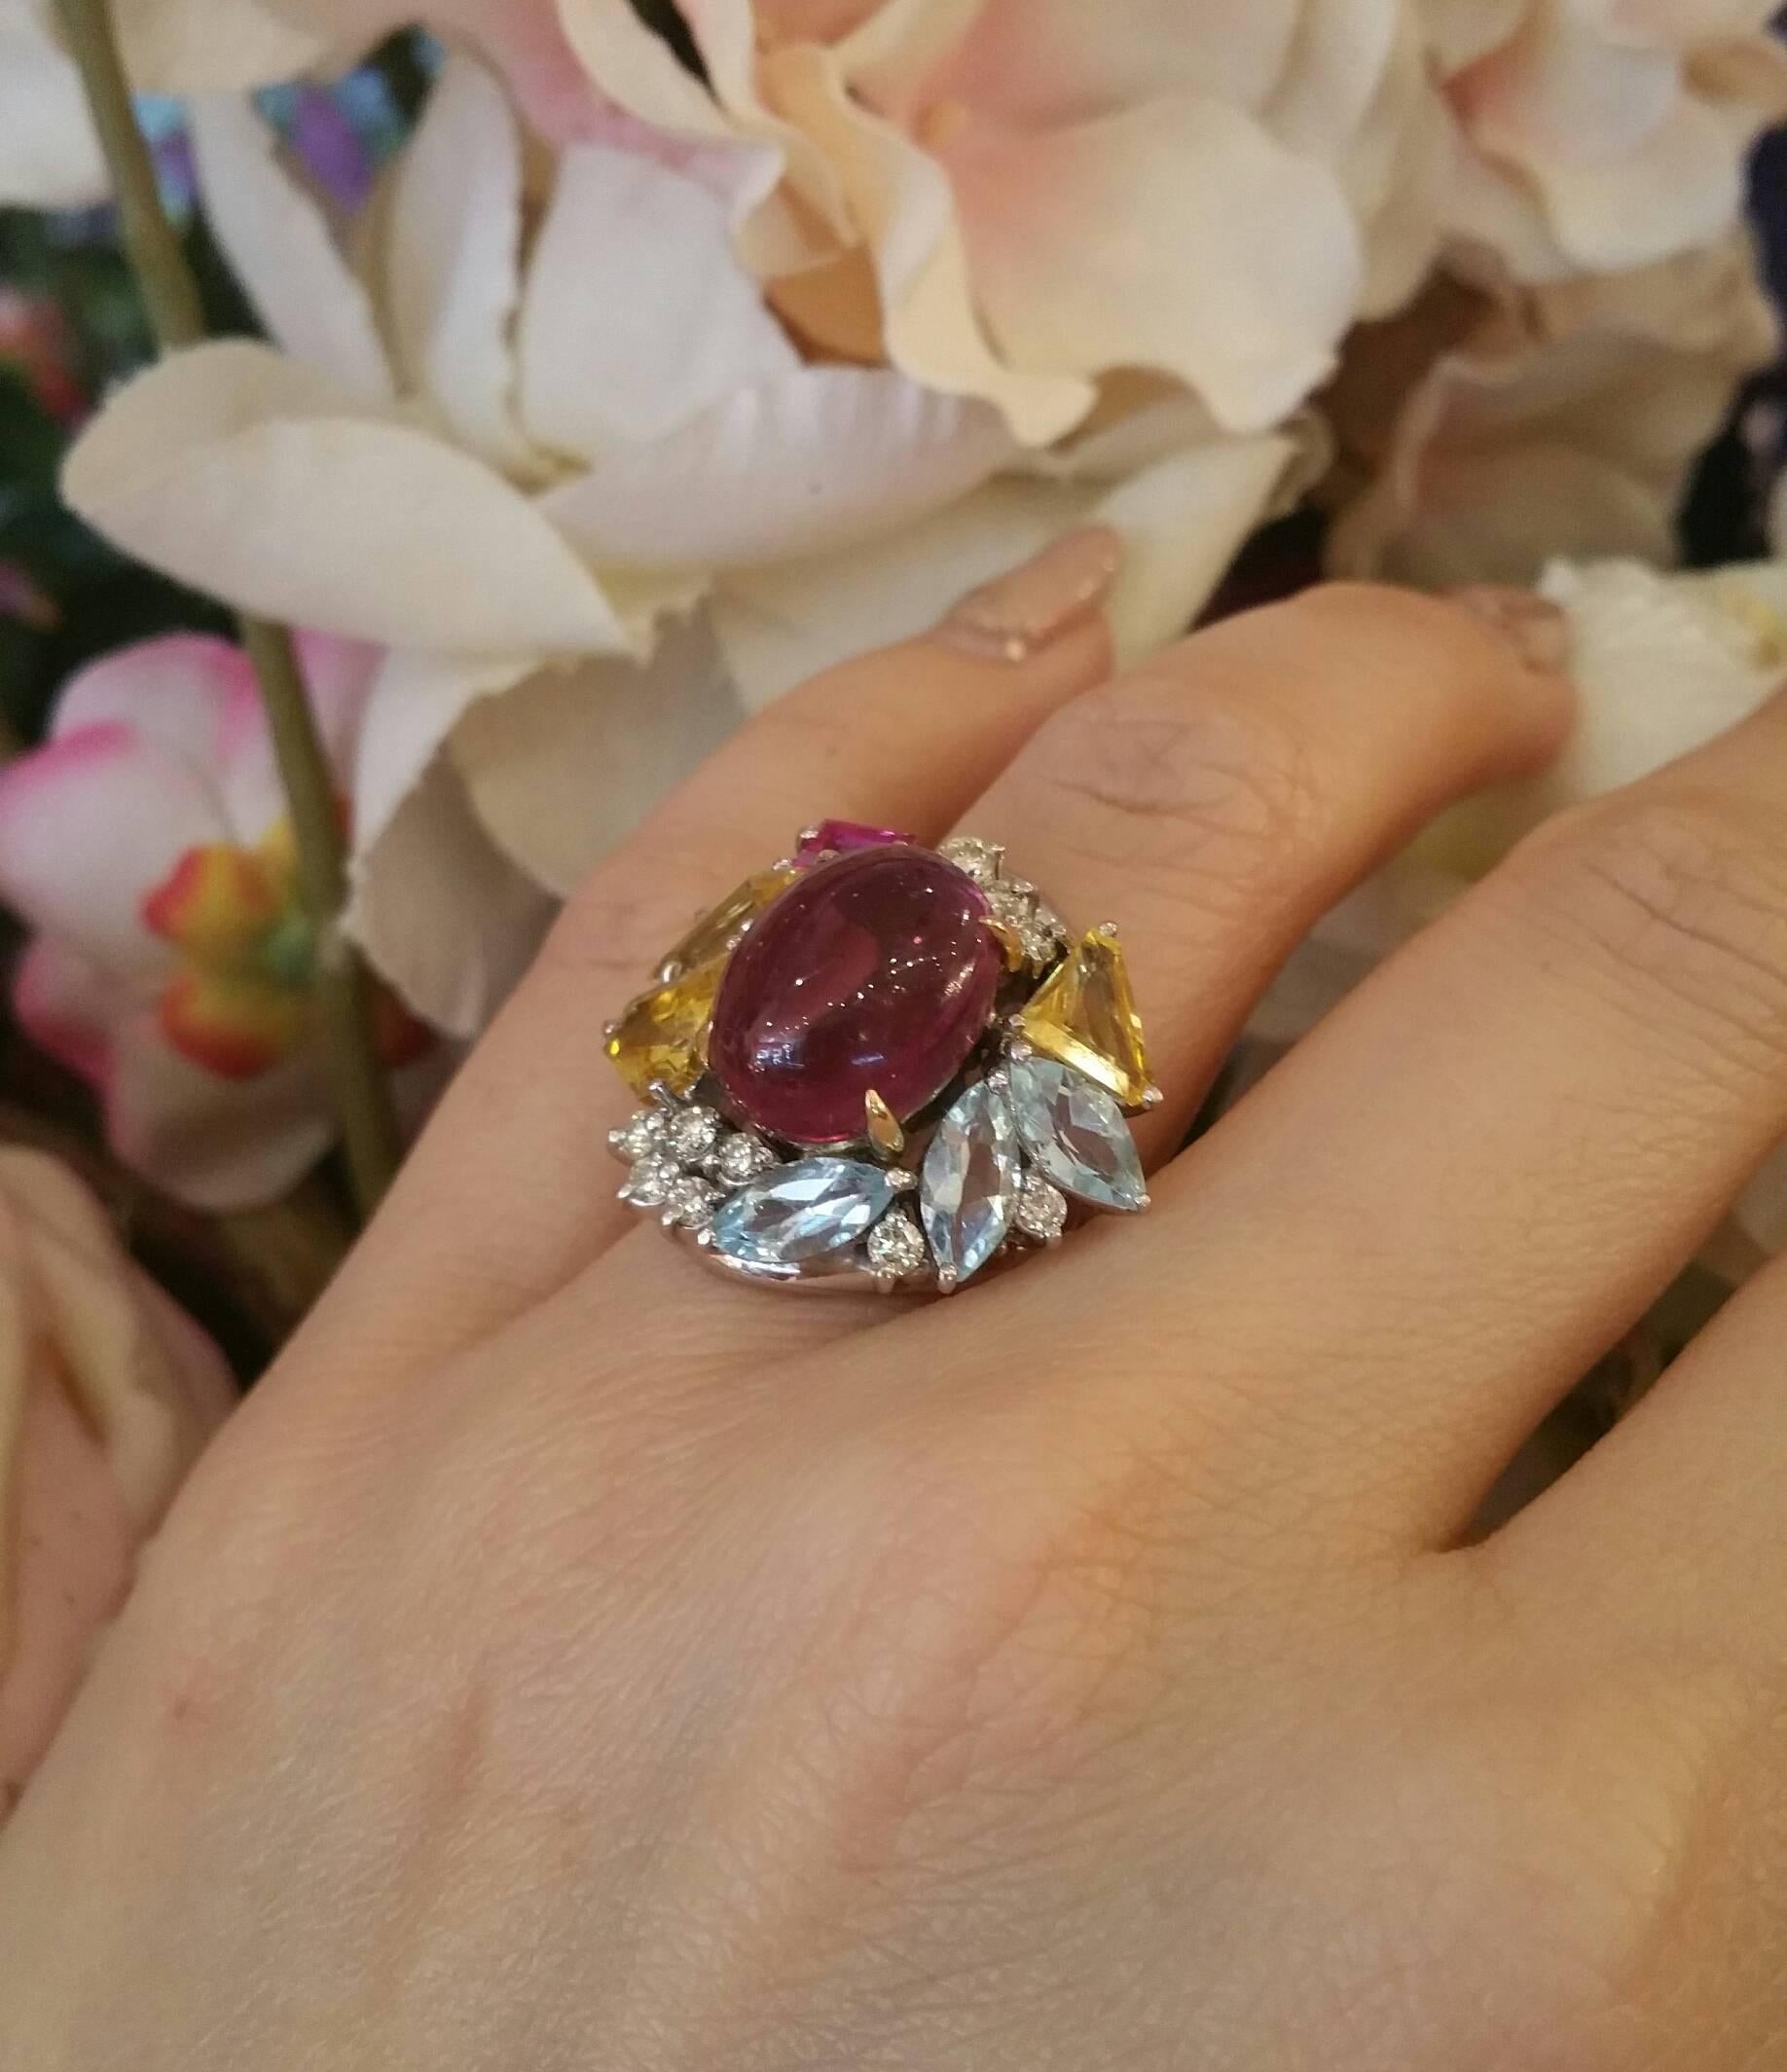 Pink Tourmaline cocktail ring featuring a 6.86 ct oval shaped cabochon in the center, surrounded by 3 fancy cut yellow Sapphires, 3 marquise shaped Aquamarines and 1 rectangular shaped Ruby, accented with round brilliant cut diamonds. (0.43ct ) 